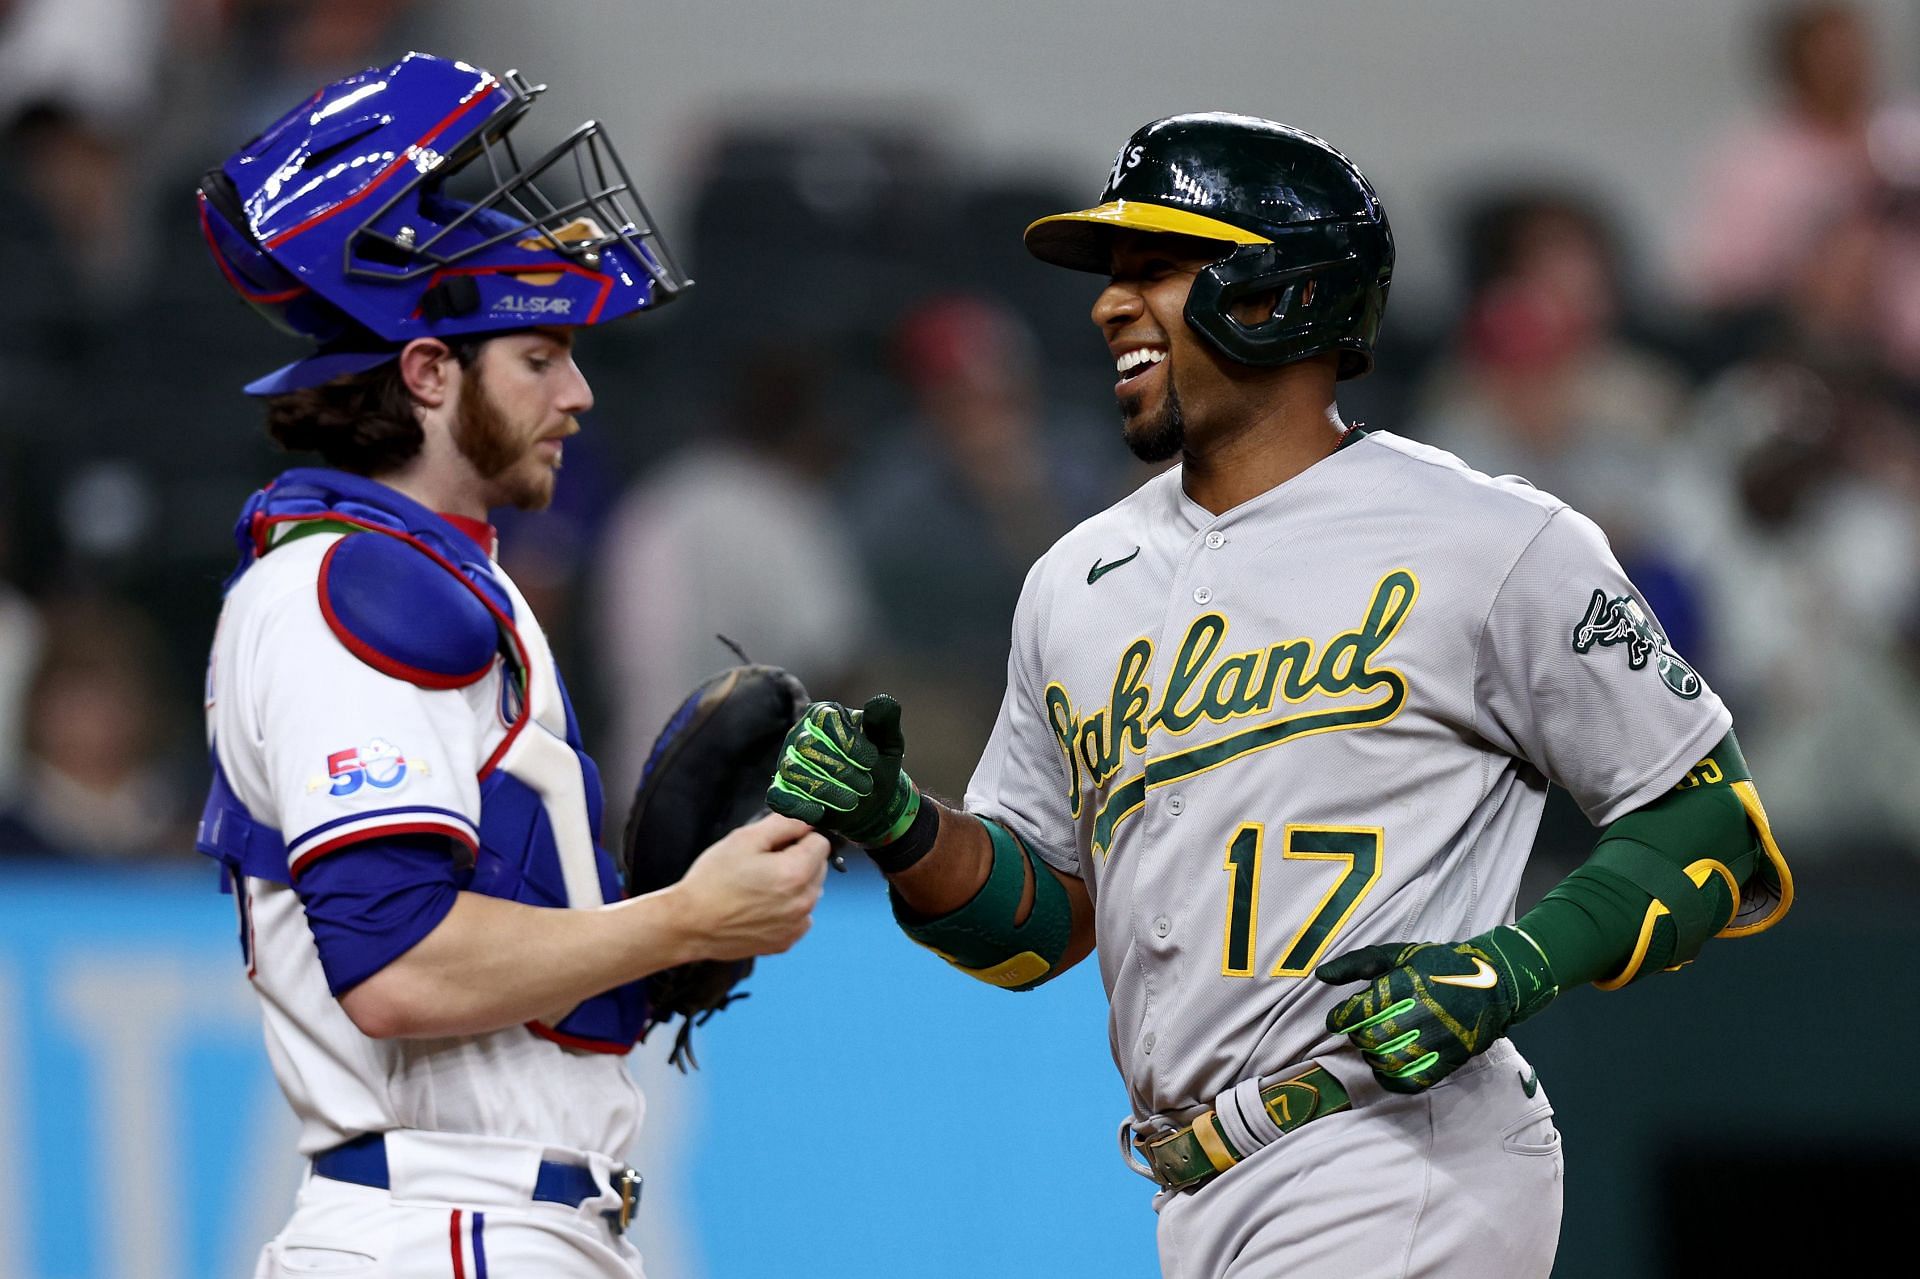 Elvis Andrus of the Athletics has just signed with the White Sox.